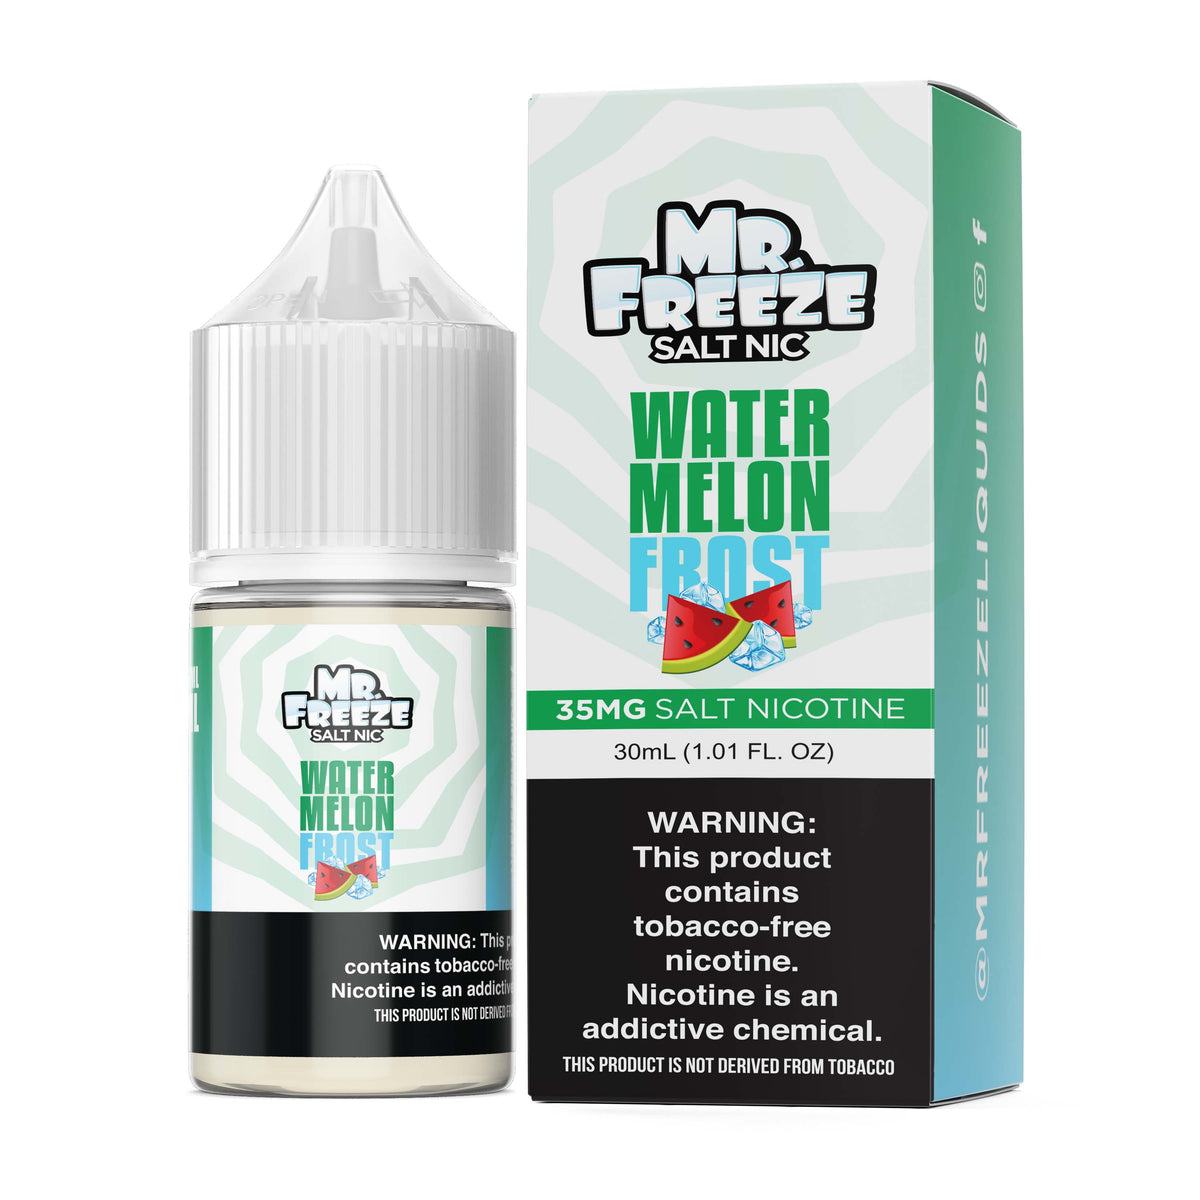 Watermelon Frost by Mr. Freeze Tobacco-Free Nicotine Salt Series 30mL with Packaging